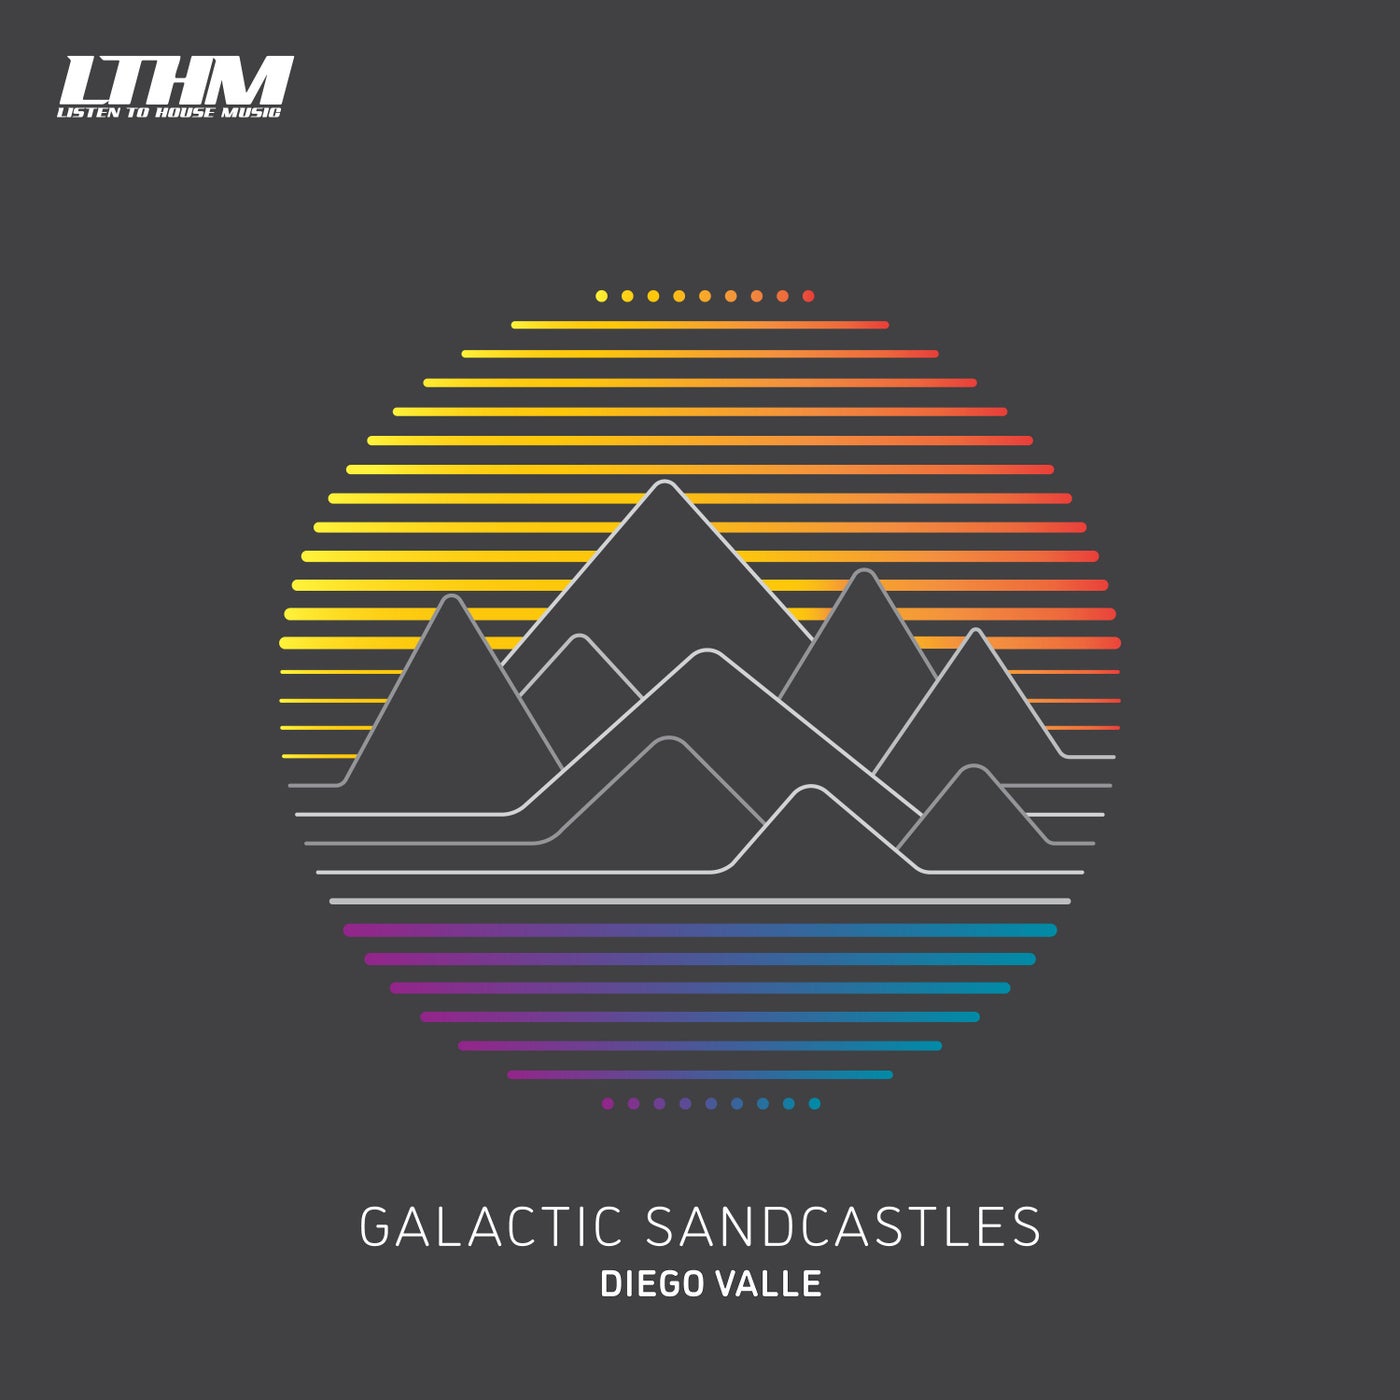 Diego Valle - Galactic Sandcastles [LTHM120]